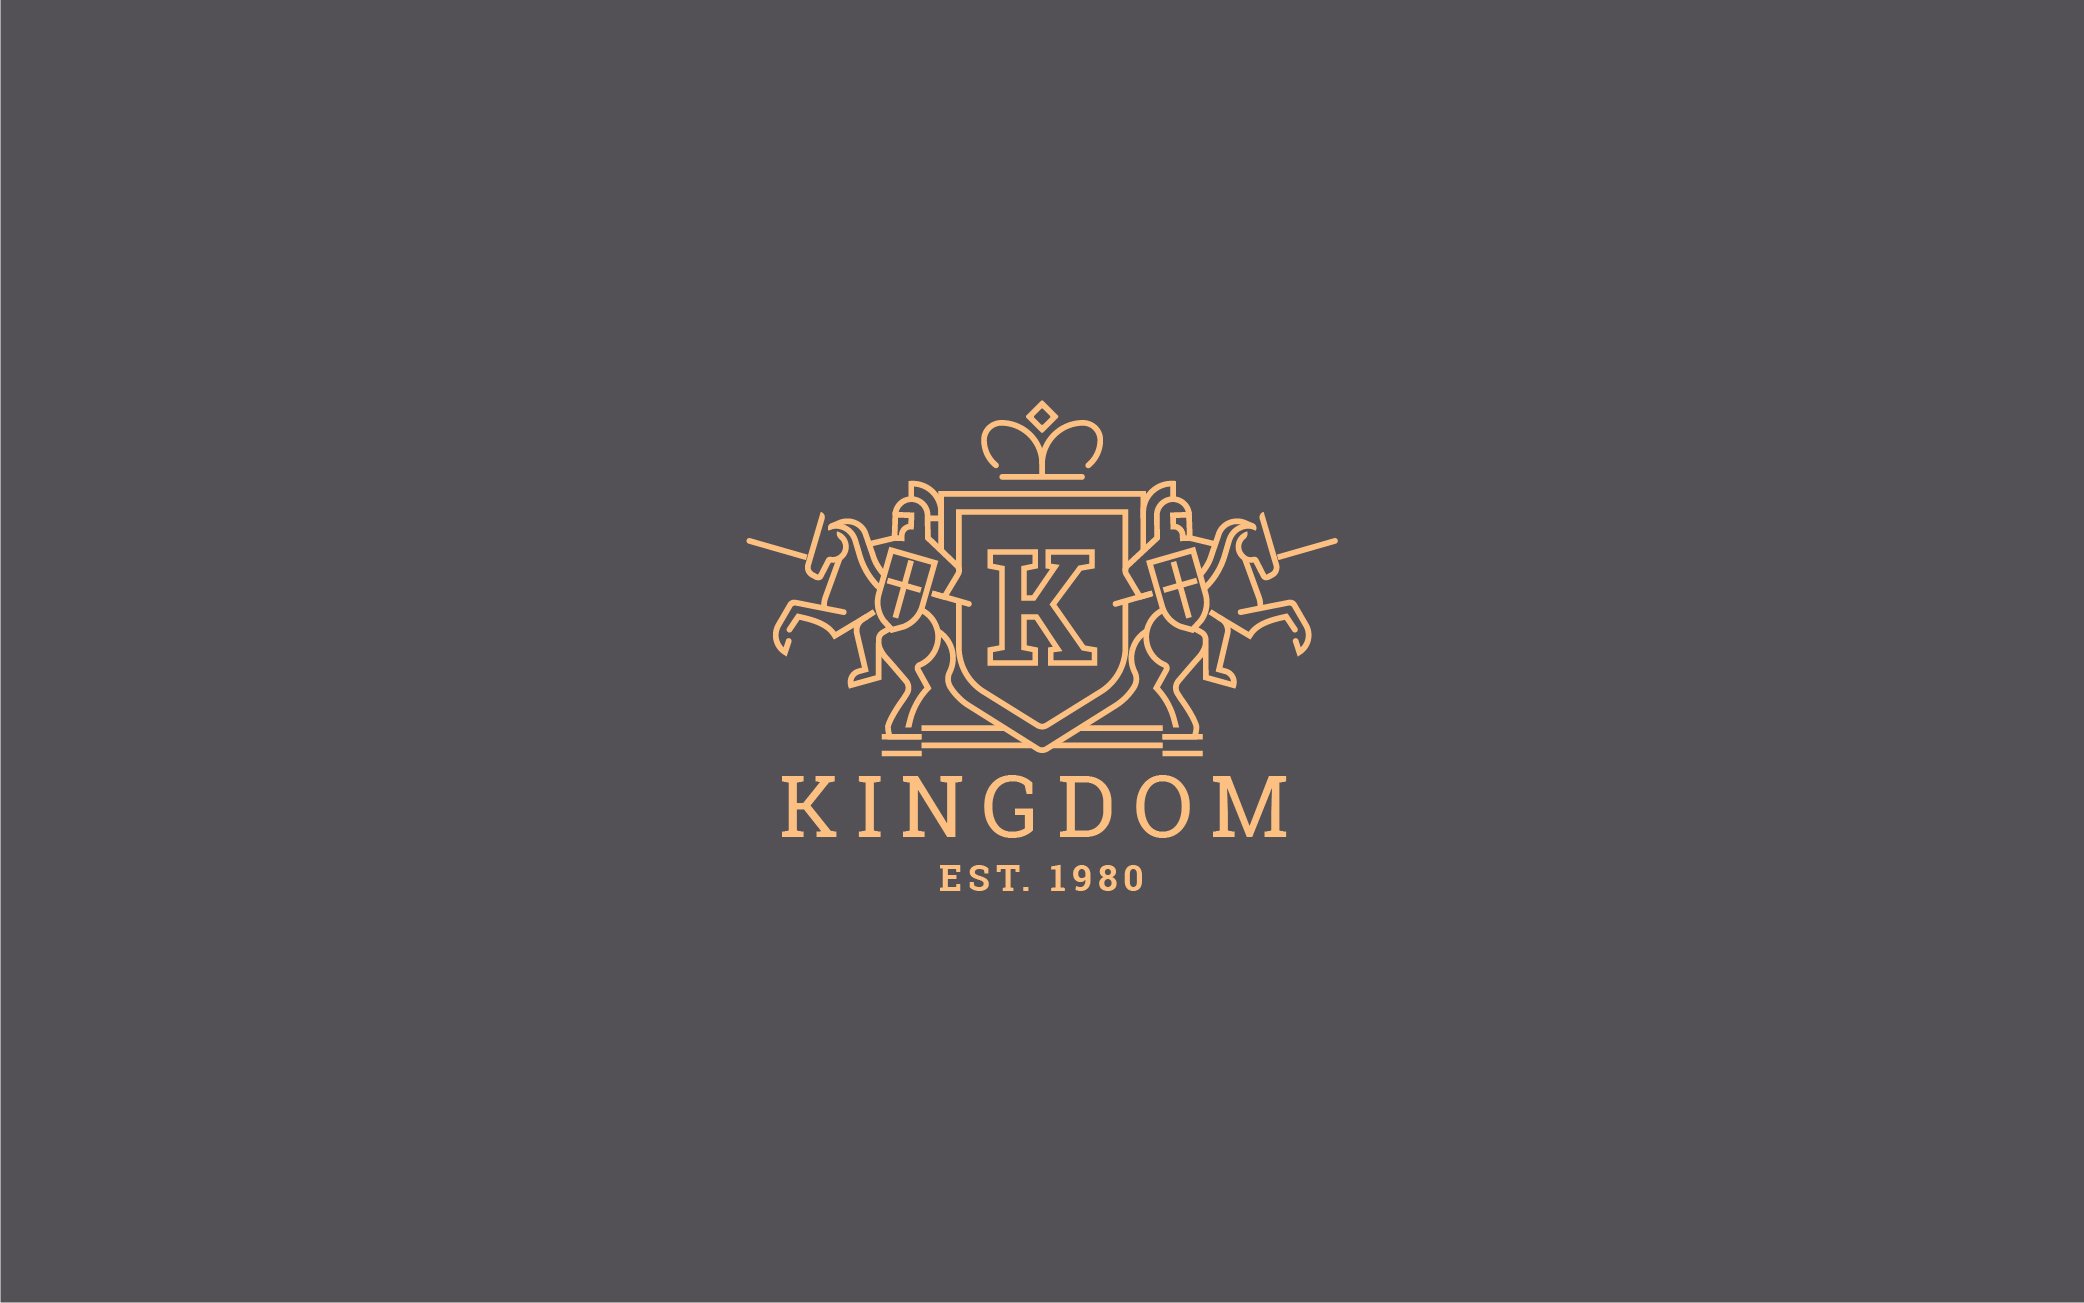 Light brown background with this royal logo.